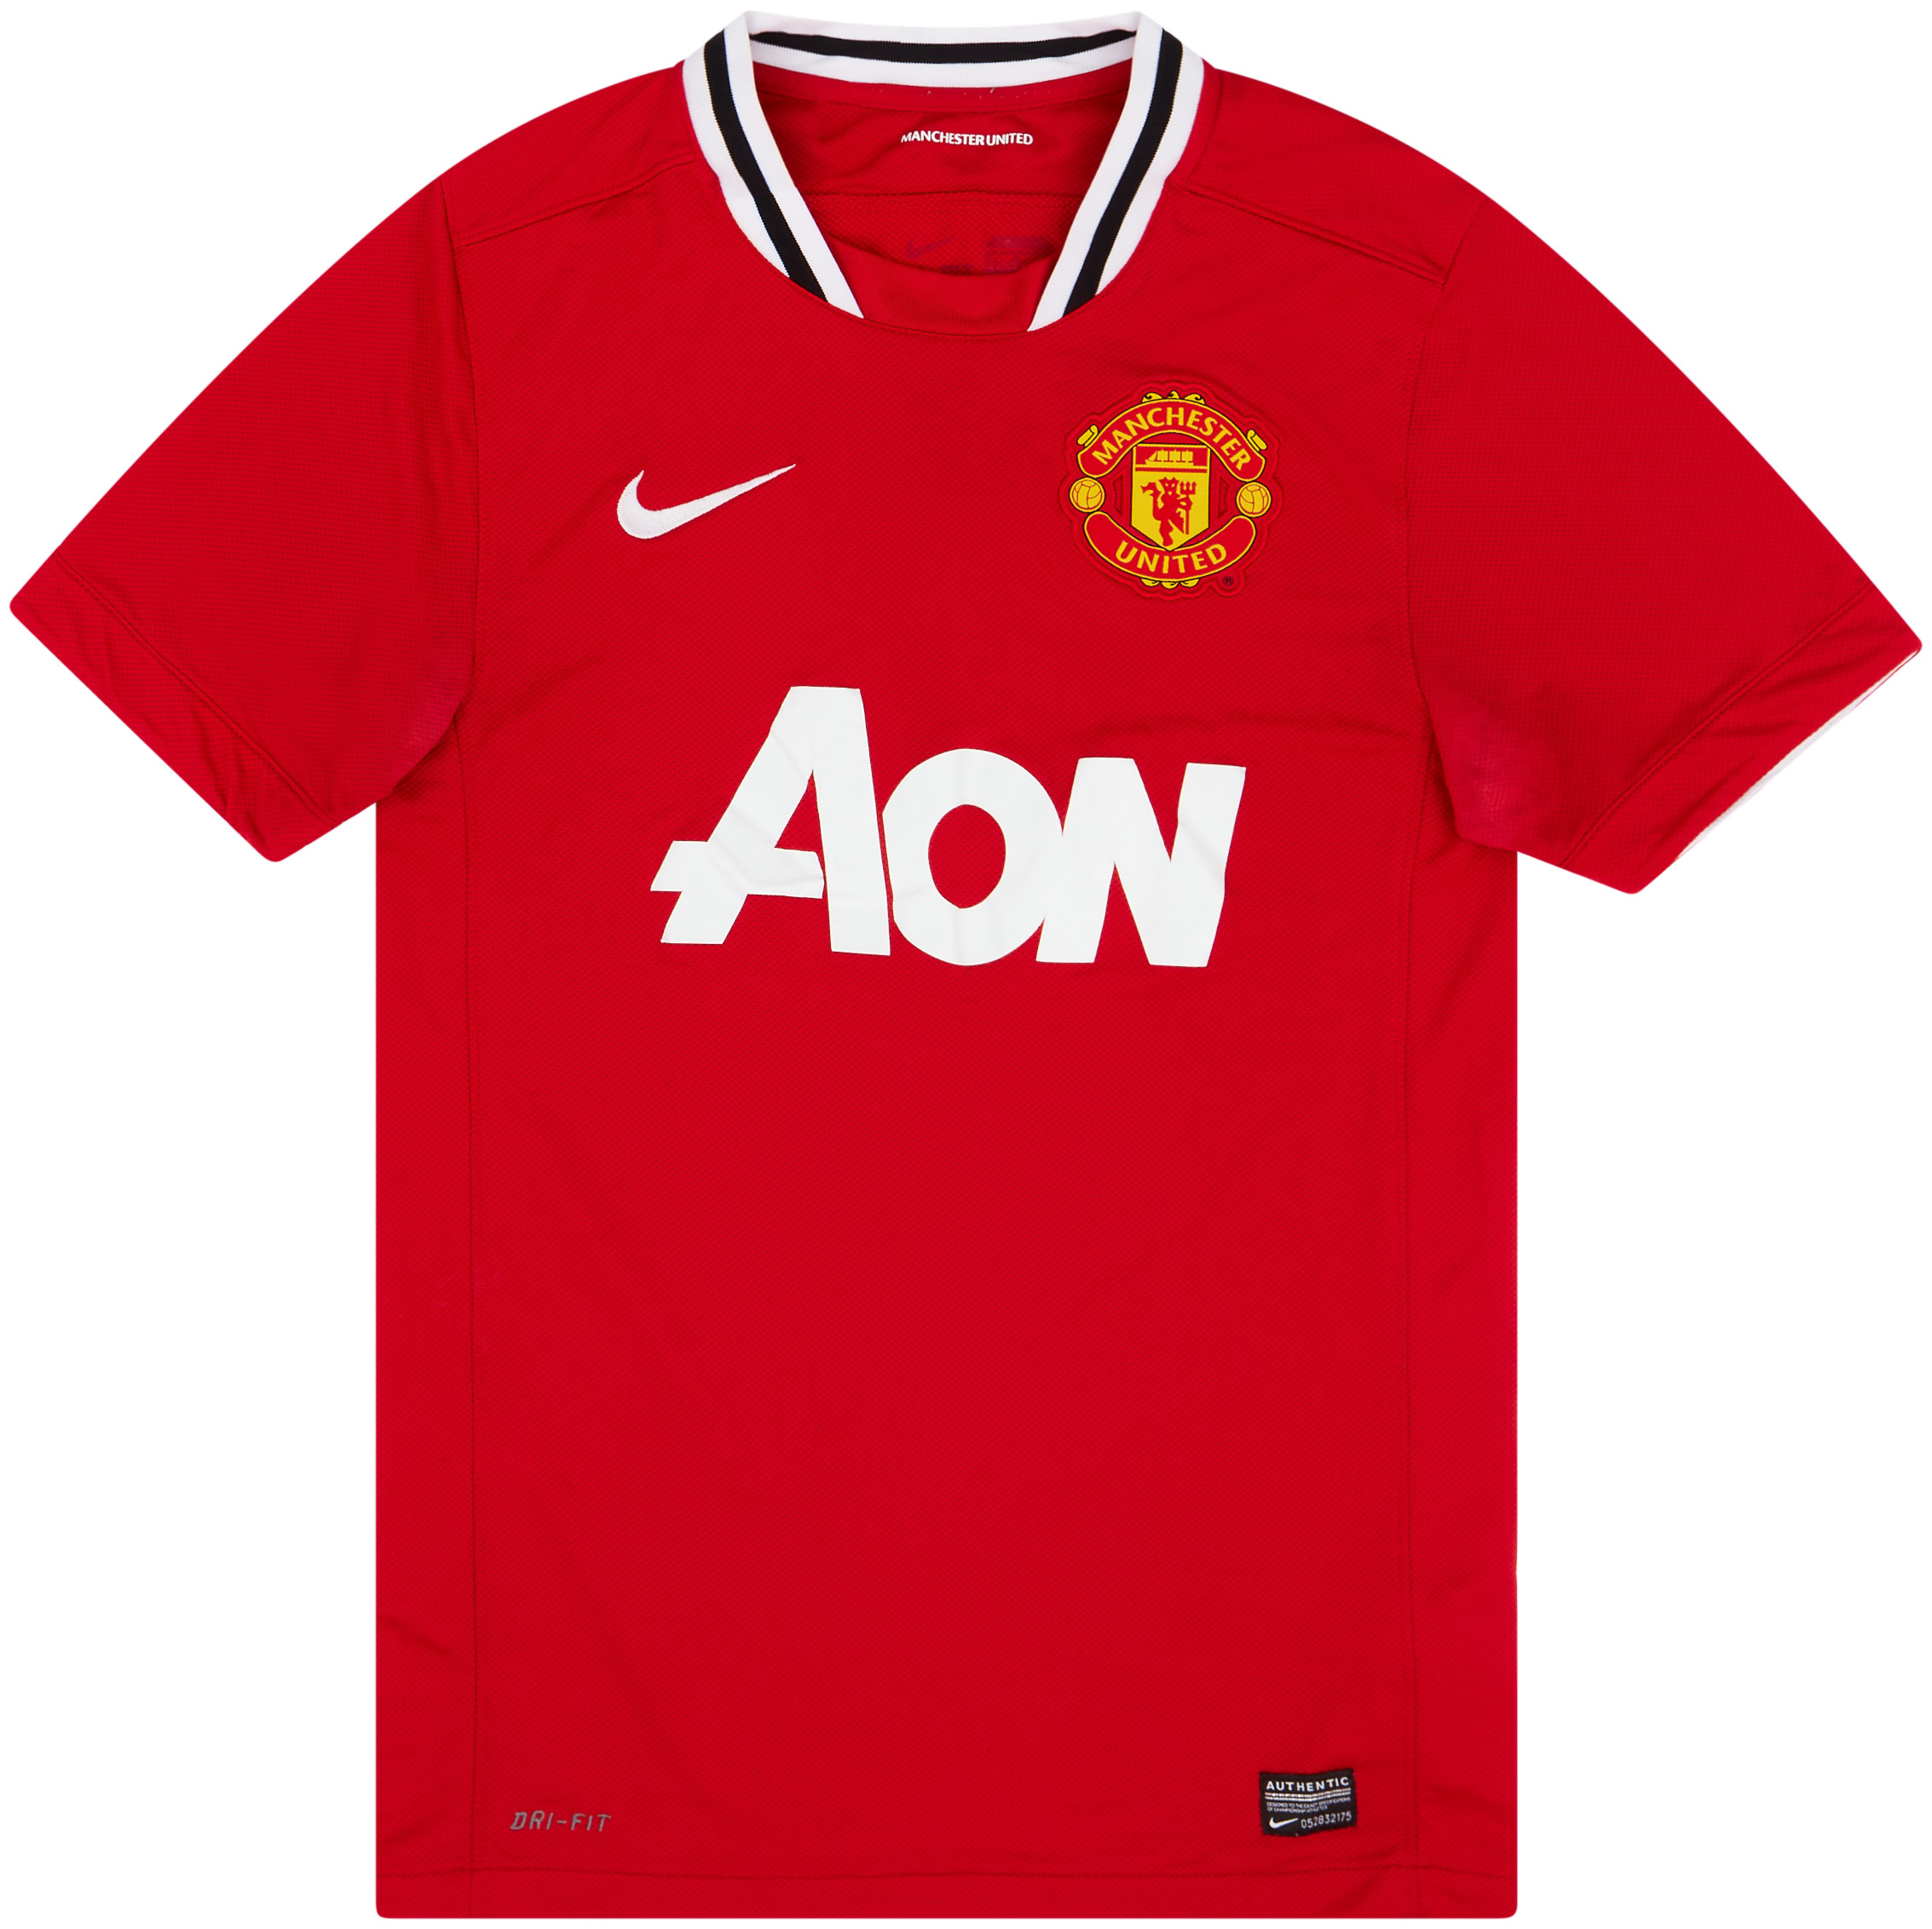 2011-12 Manchester United Home Shirt - 5/10 - ()